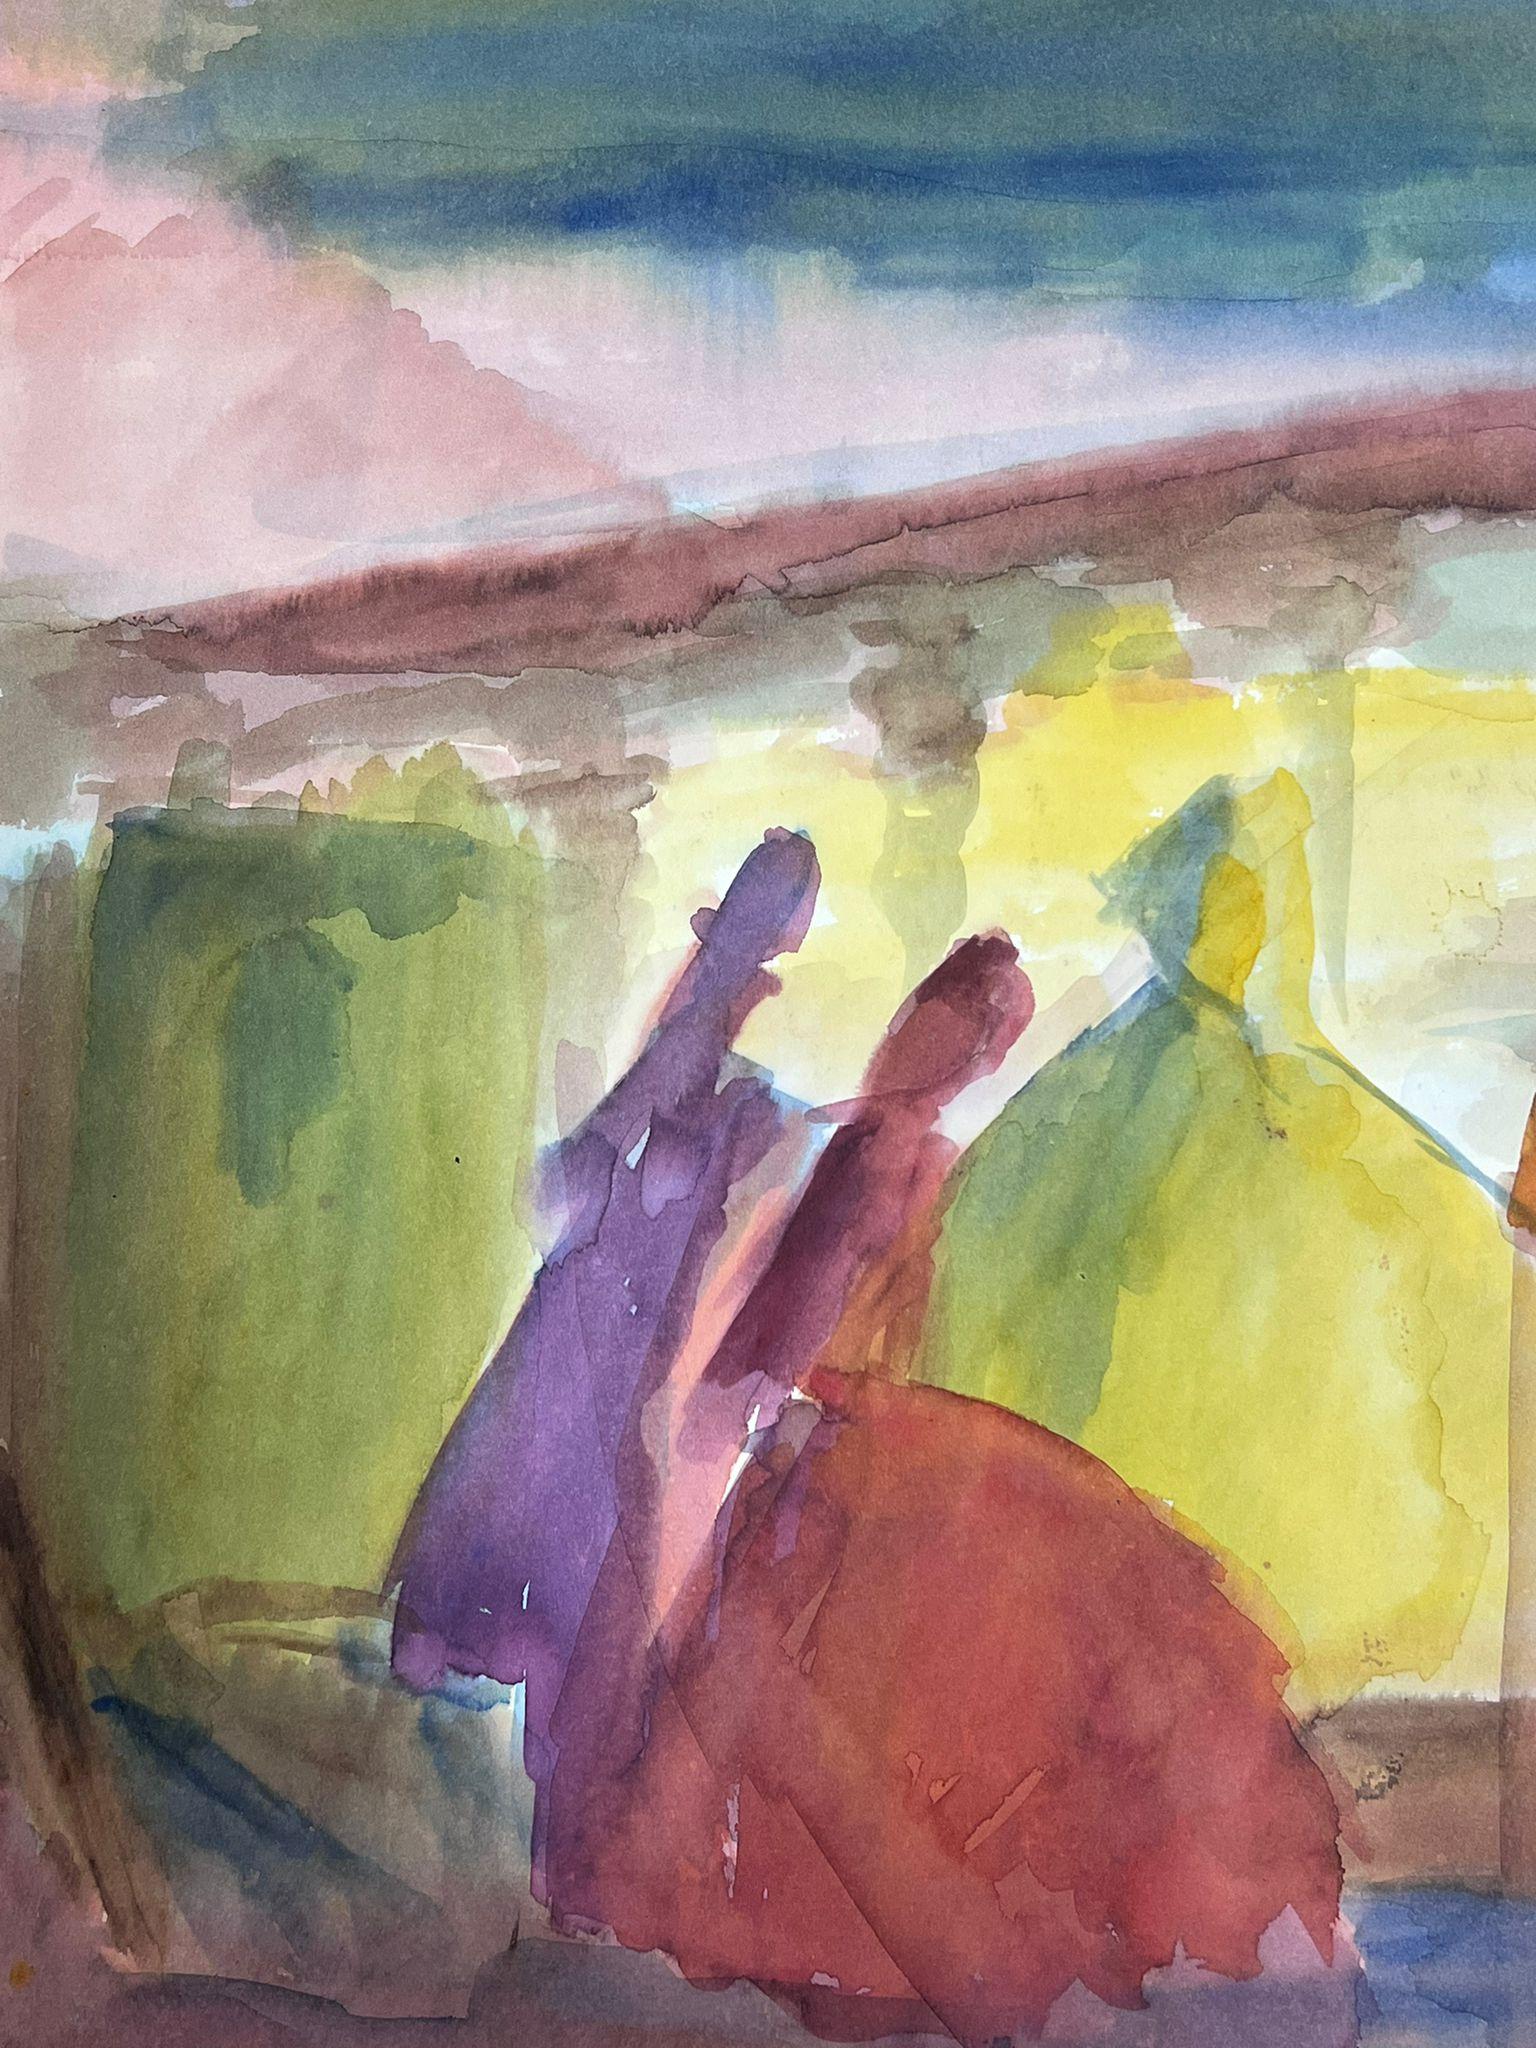 French Expressionist
by Guy Nicod
(French 1923 - 2021)
watercolour on artist paper, unframed
painting : 15.75 x 19 inches
provenance: artists estate, France
condition: very good and sound condition